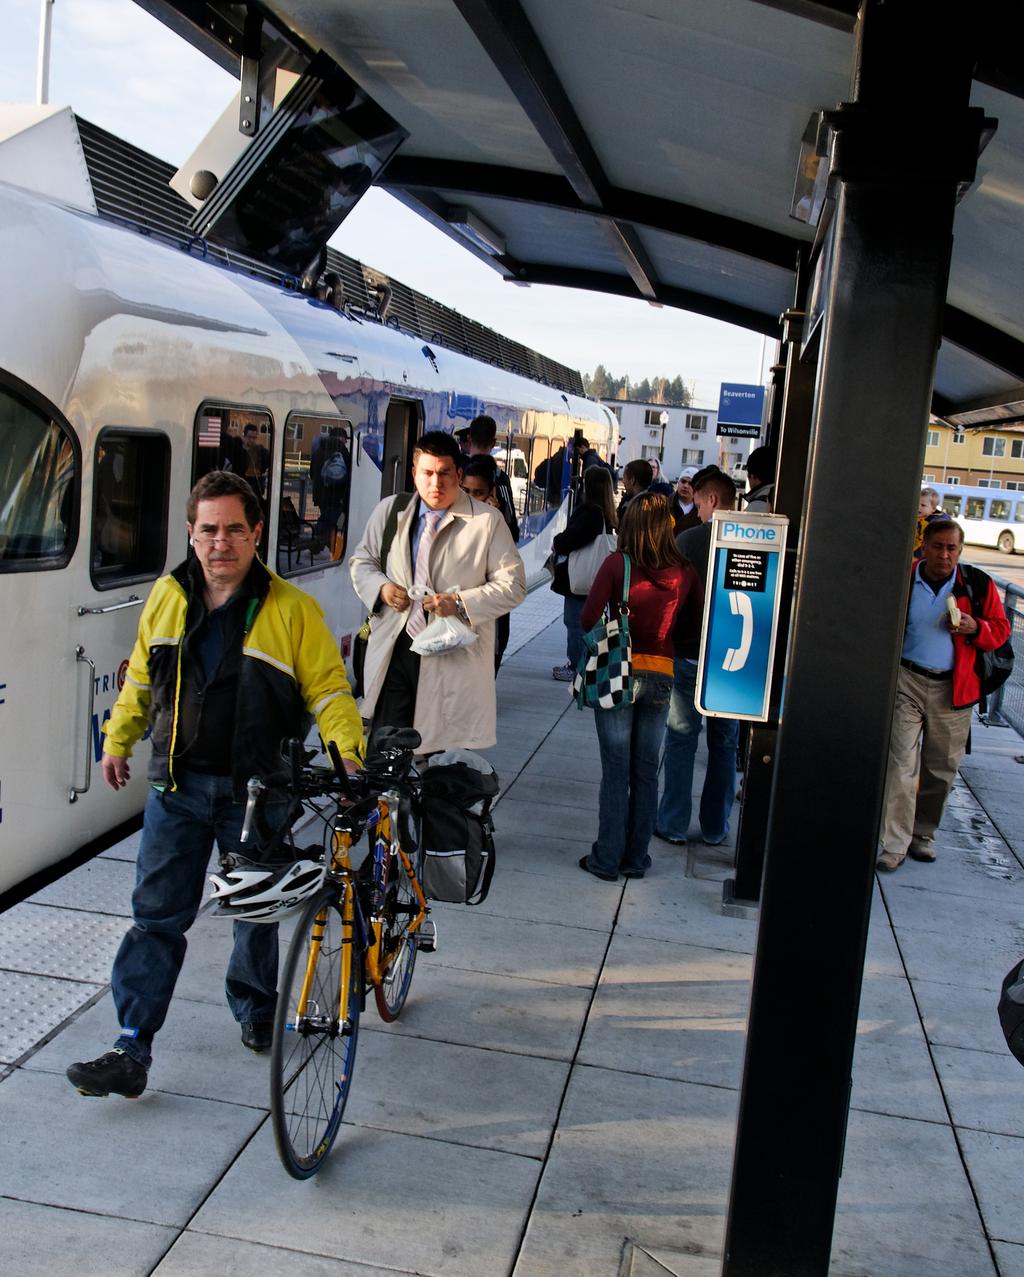 WHAT ARE TRAVEL OPTIONS PROGRAMS? Travel options programs encourage residents, commuters and visitors to walk, bike, share rides and take transit.